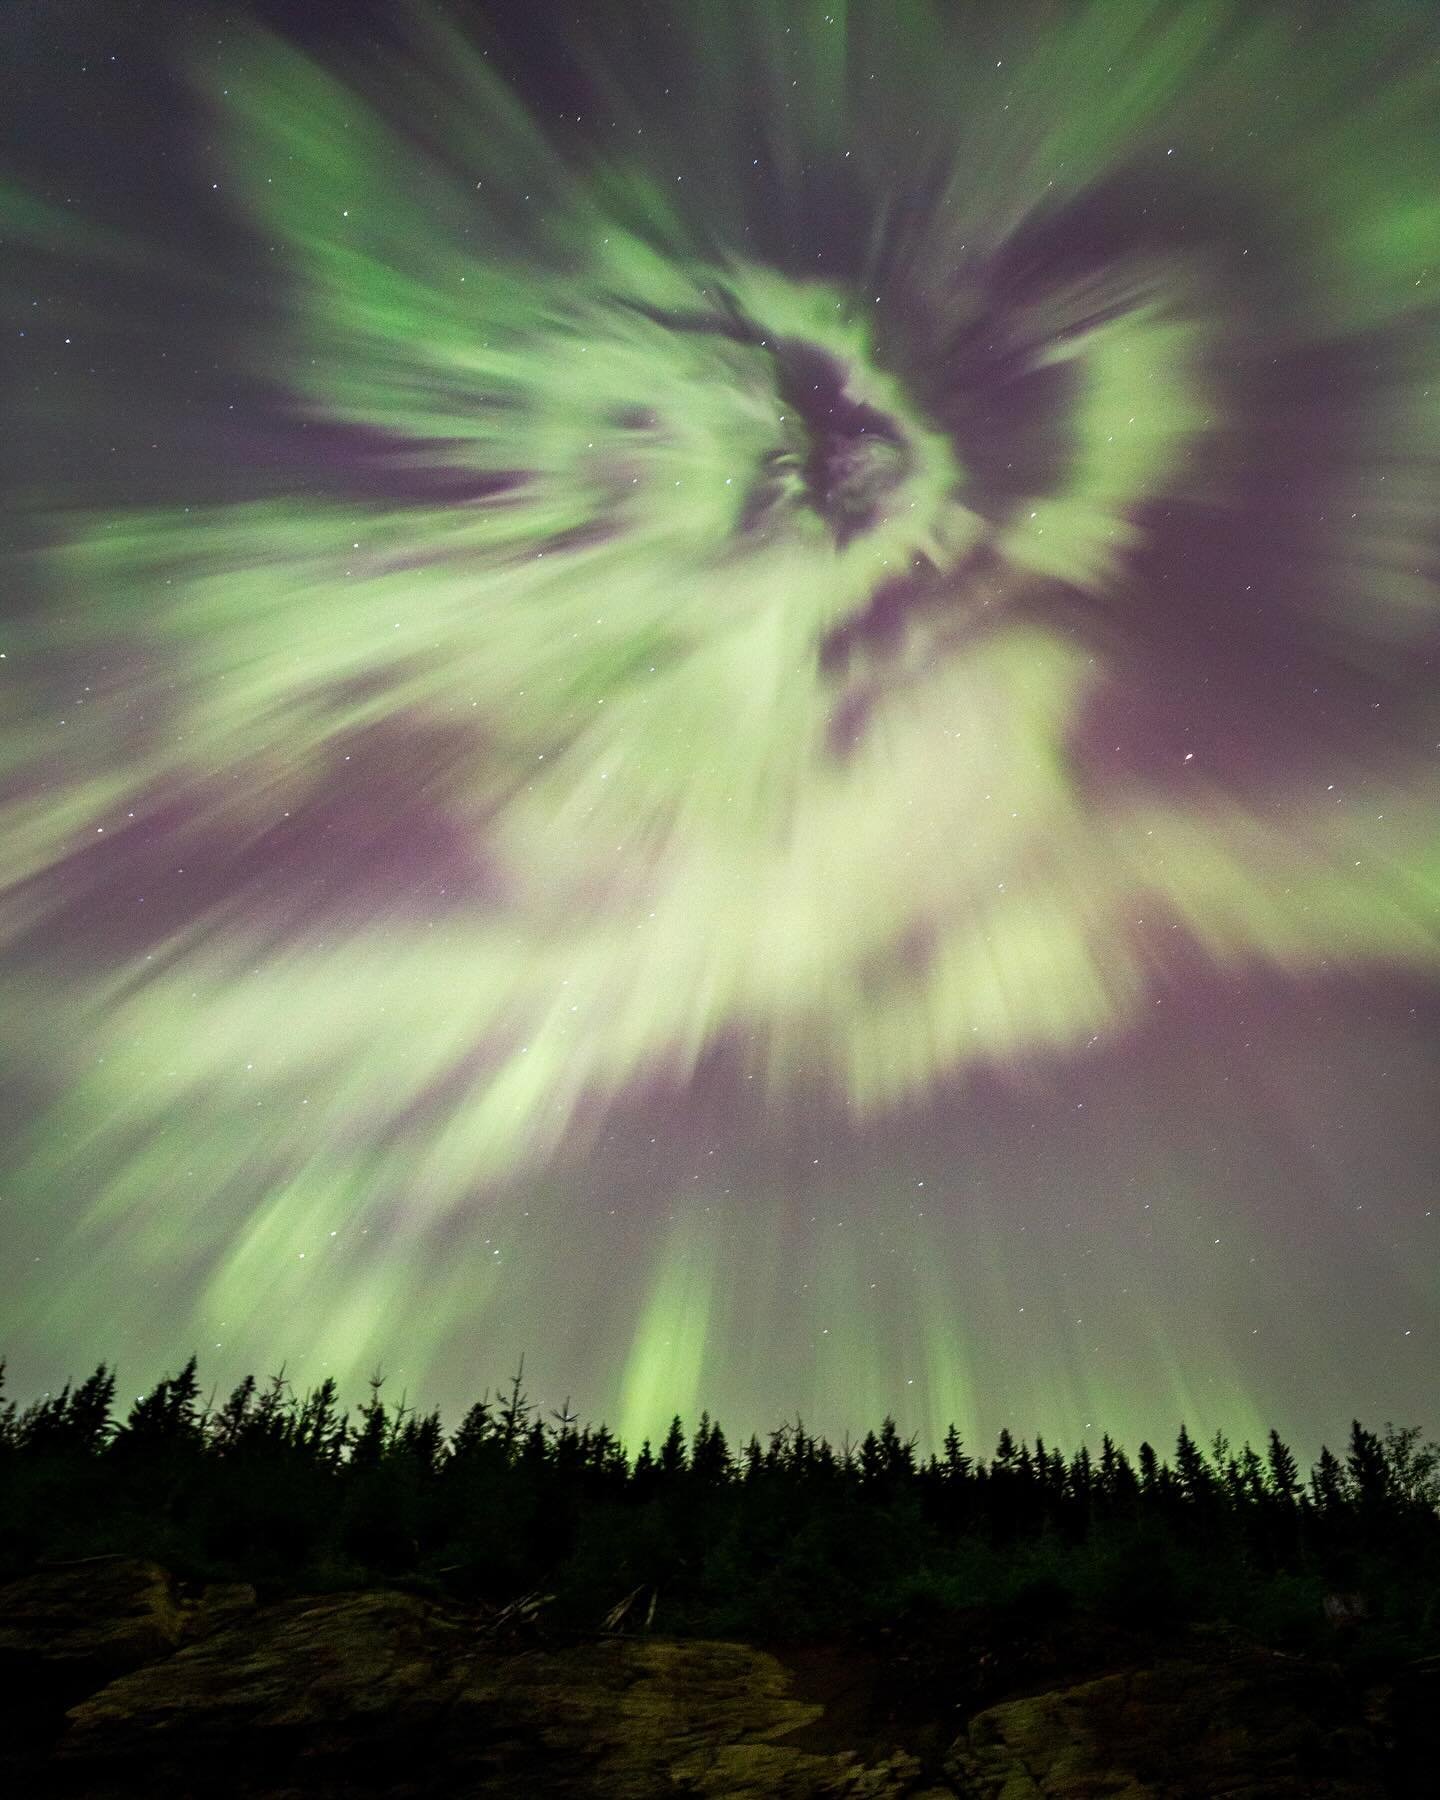 Day 2074: Now to place our Friday aurora event in some context. Carbon-14 dating allows us to see possible aurora events from centuries ago. During extreme events when energetic particles enter our atmosphere from the sun, a proton can be dislodged f